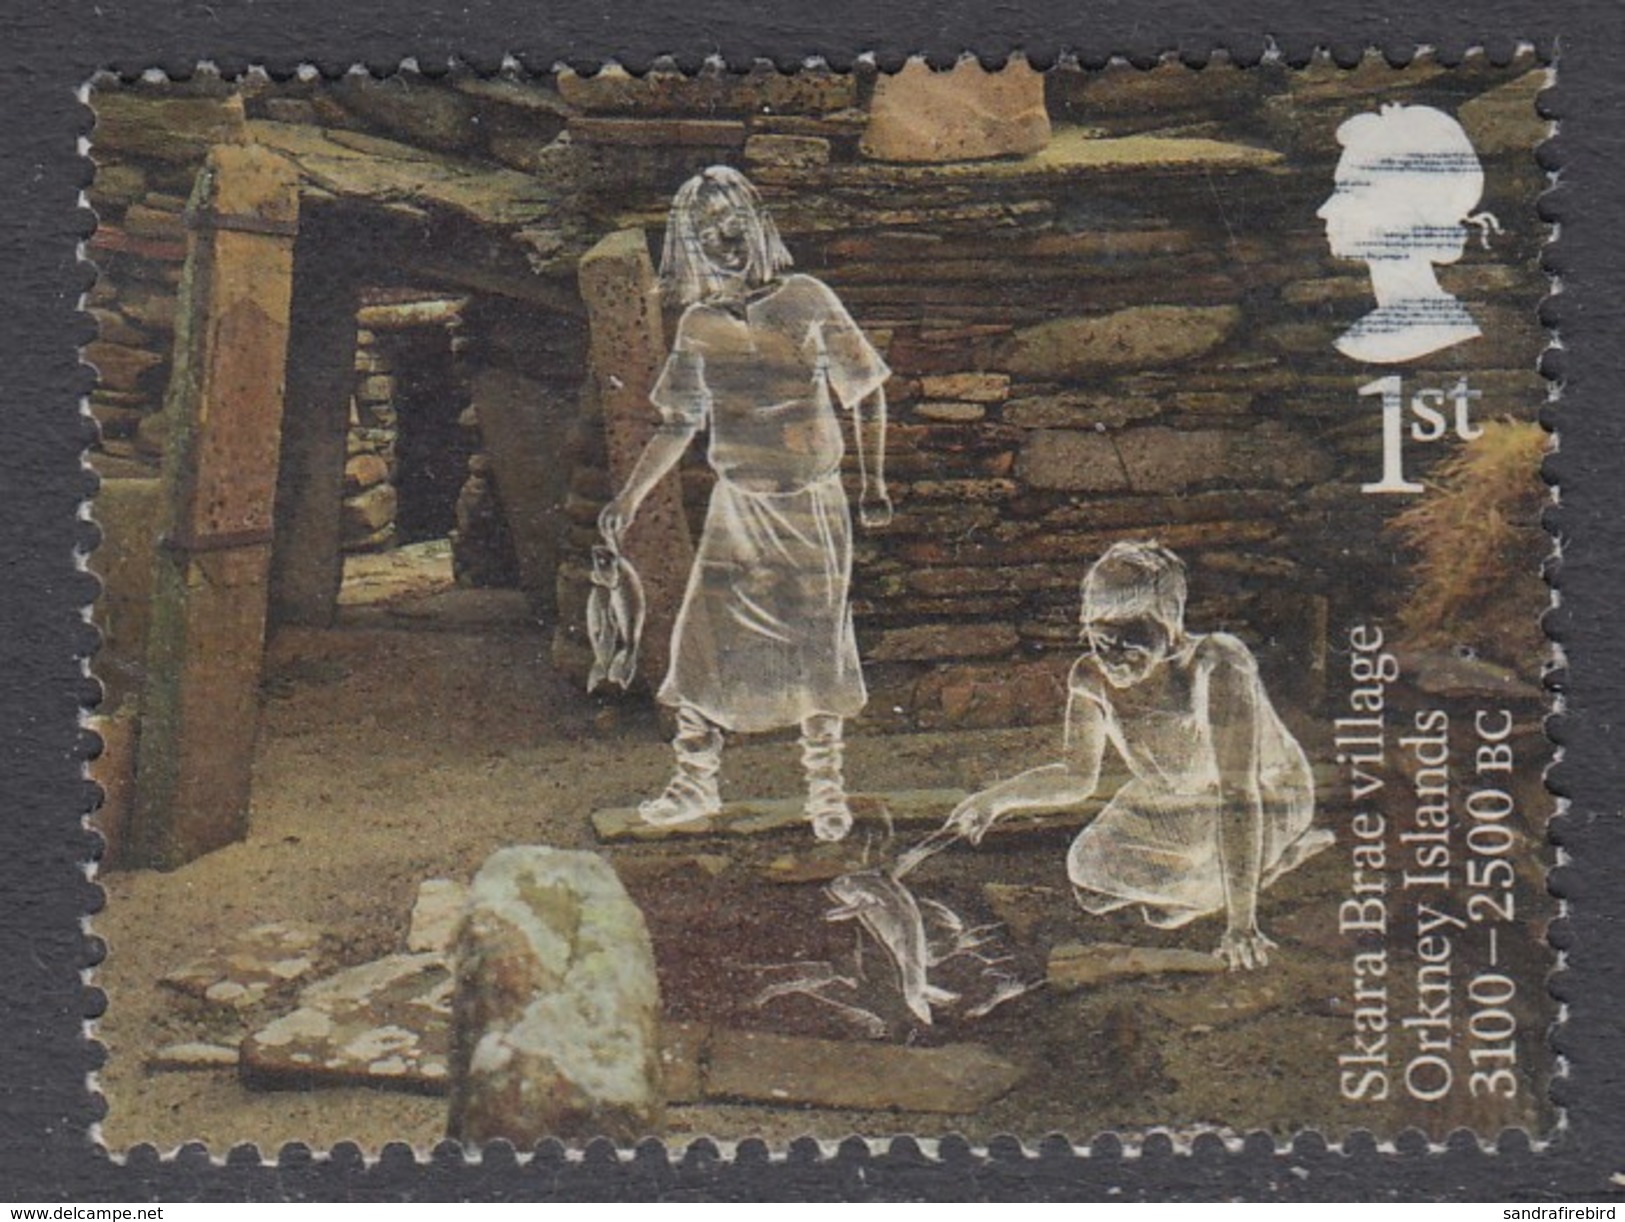 GREAT BRITAIN - 2017 Ancient Britain - Skara Brae Village, Orkney Islands, 3100-2500 BC 1st Fine Used - Used Stamps